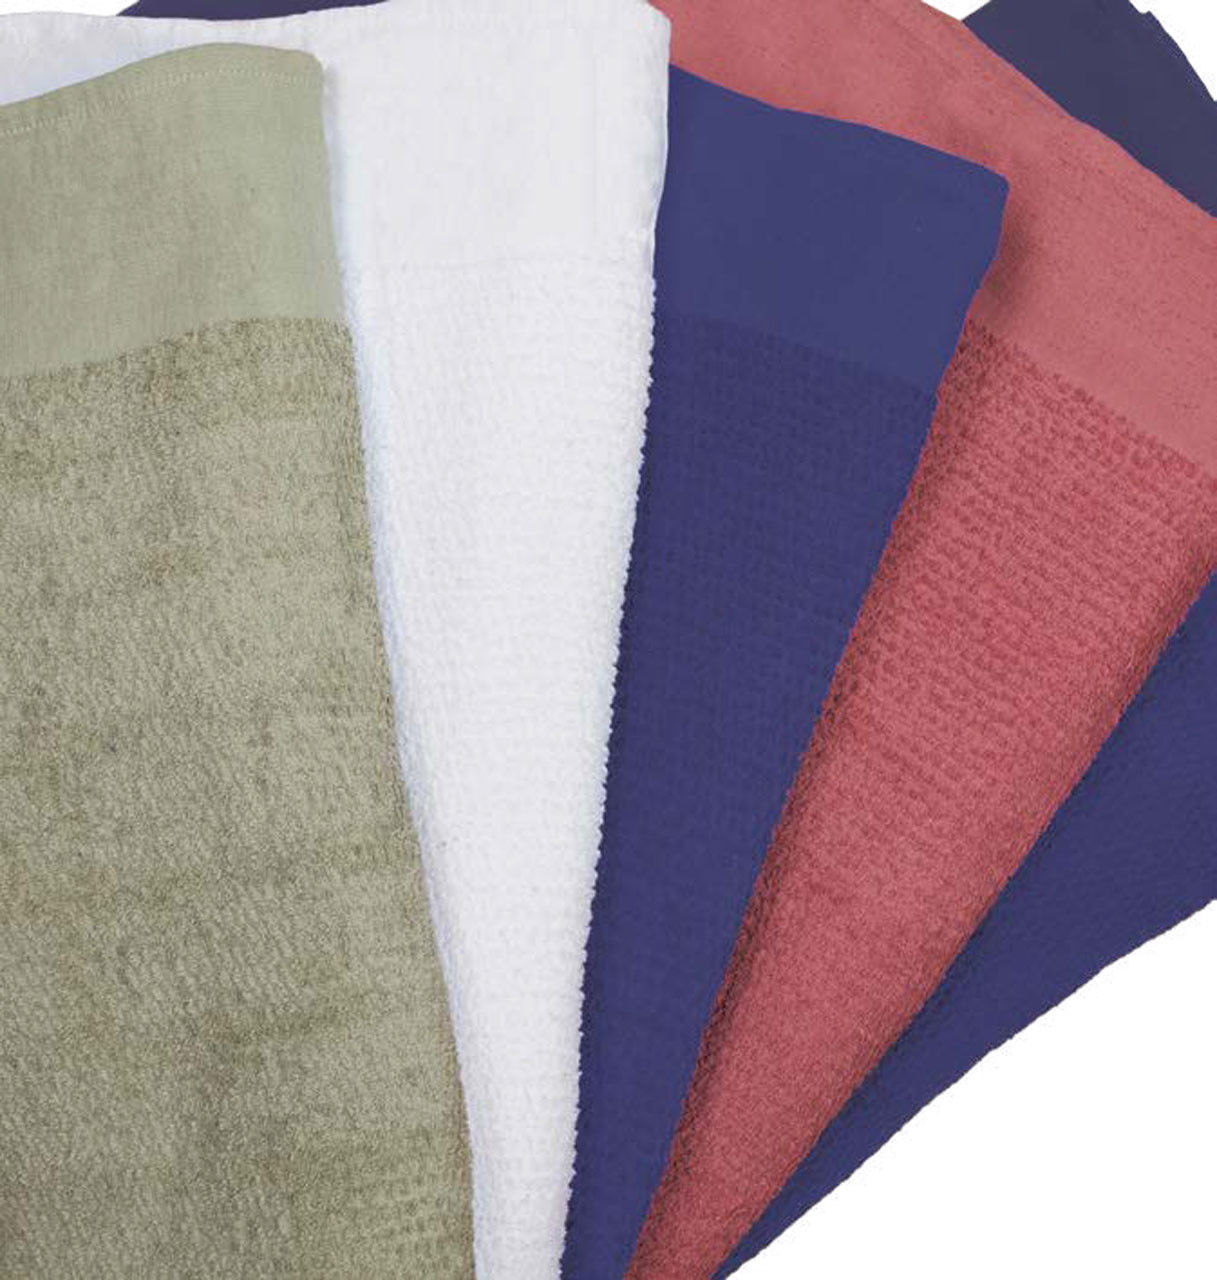 What are the latest colors for Terry Hospital Blankets in terry cloth?